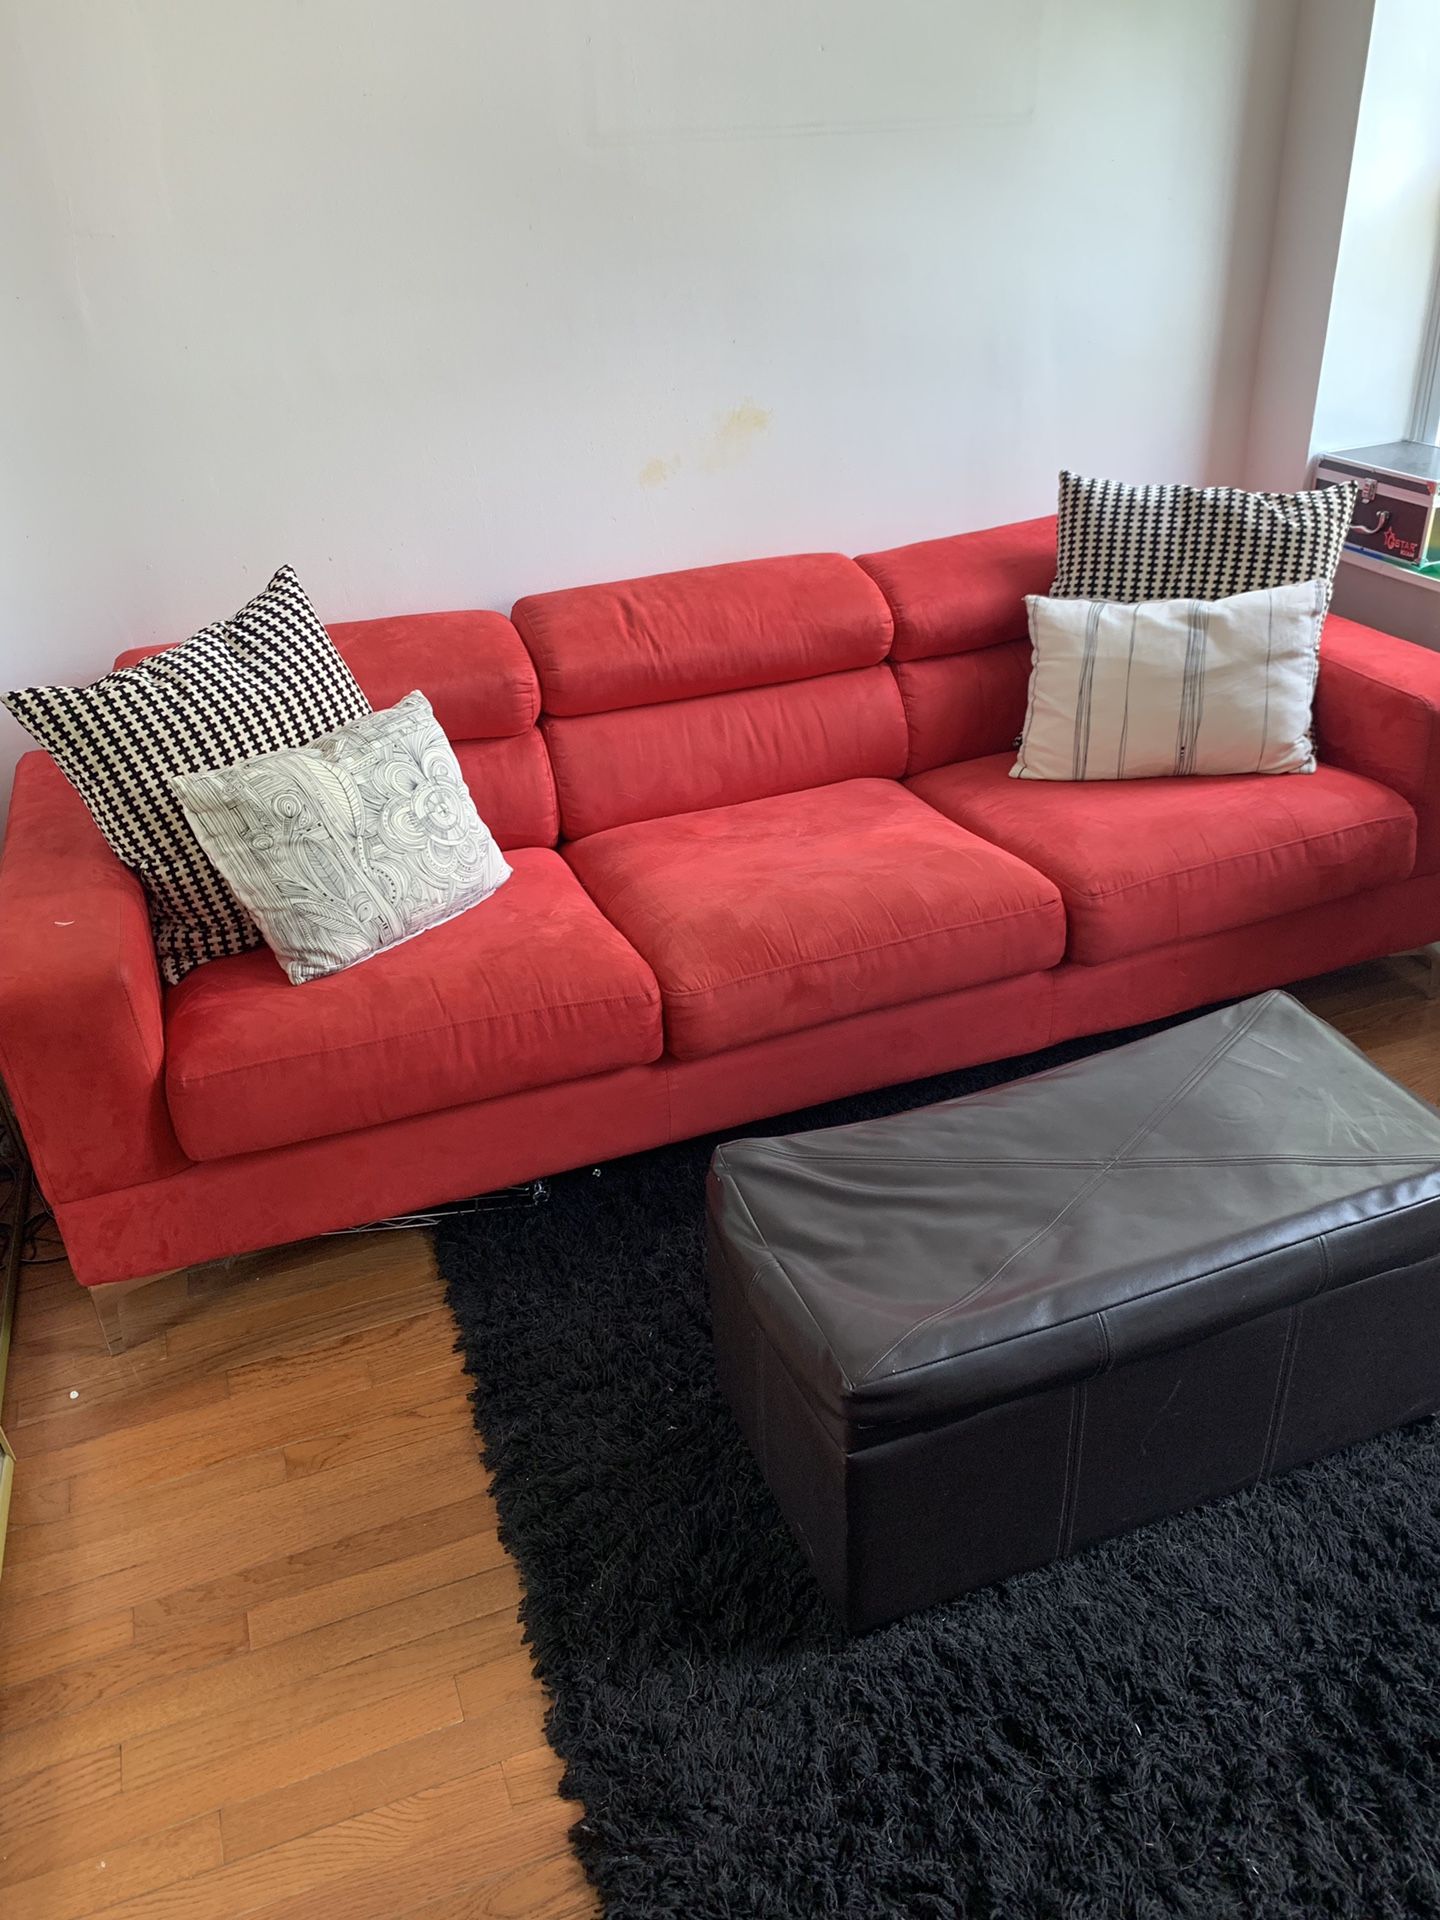 Ashley Furniture Red Couch and Ottoman + Rug